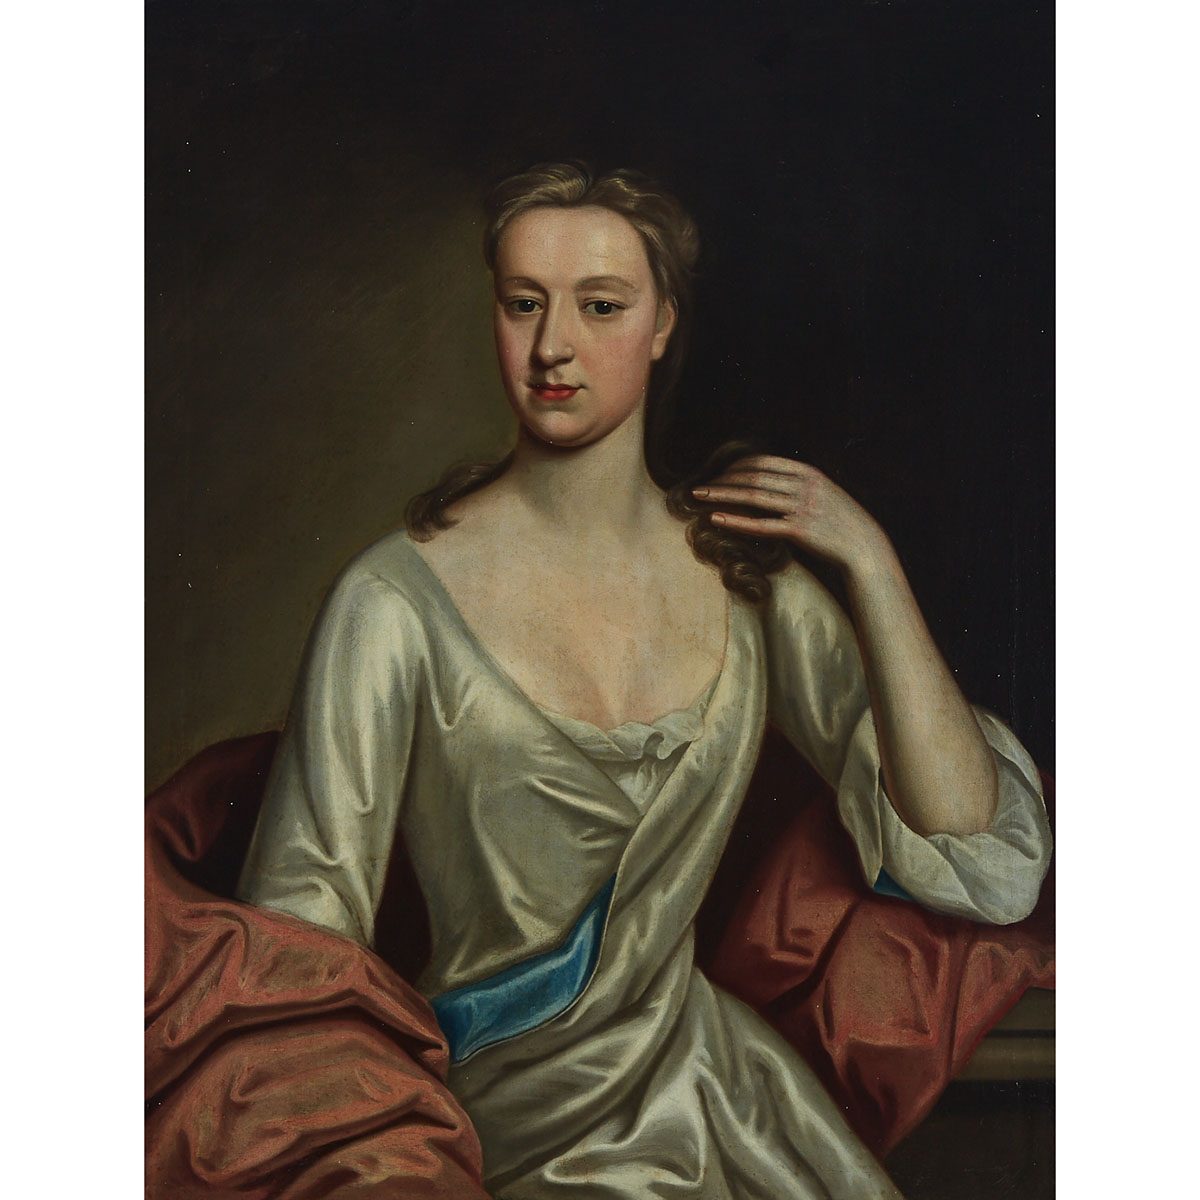 Attributed to Sir Godfrey Kneller (1646-1723)